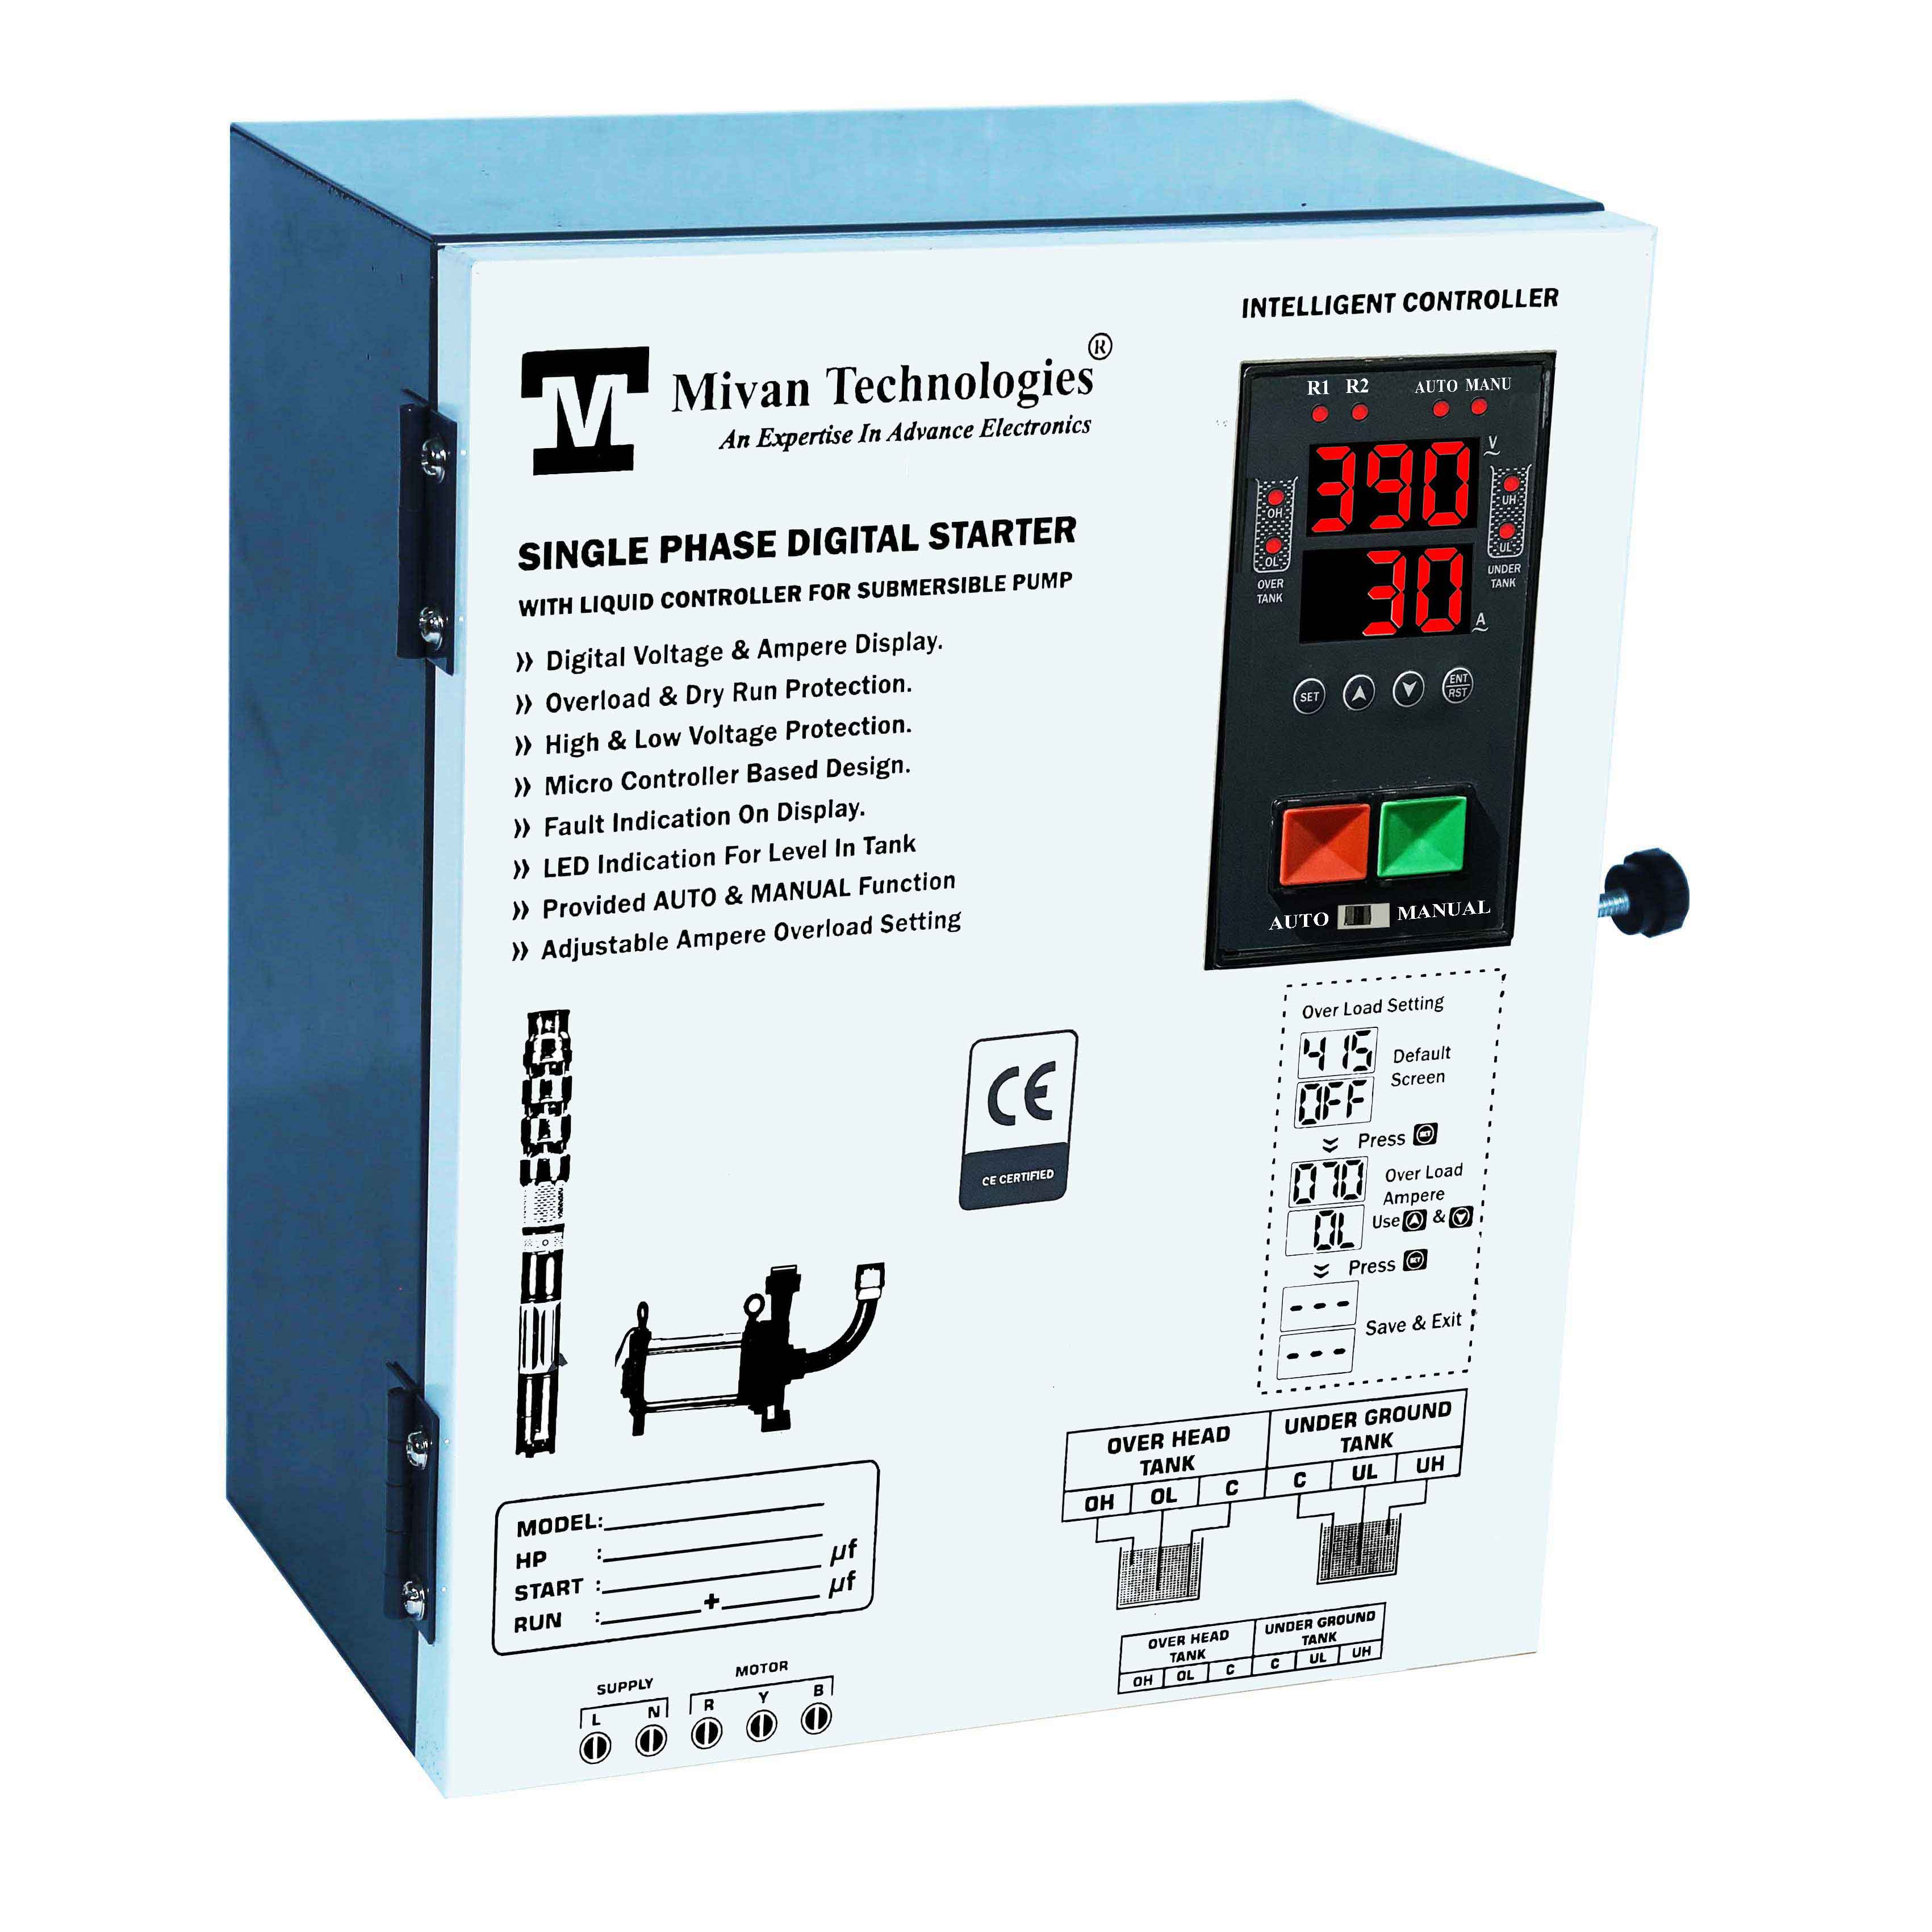 DSL SR for 1.5 HP motor Digital water controller and starter panel with volt and amp meter with HV LV OL DRY protection cyclic timer